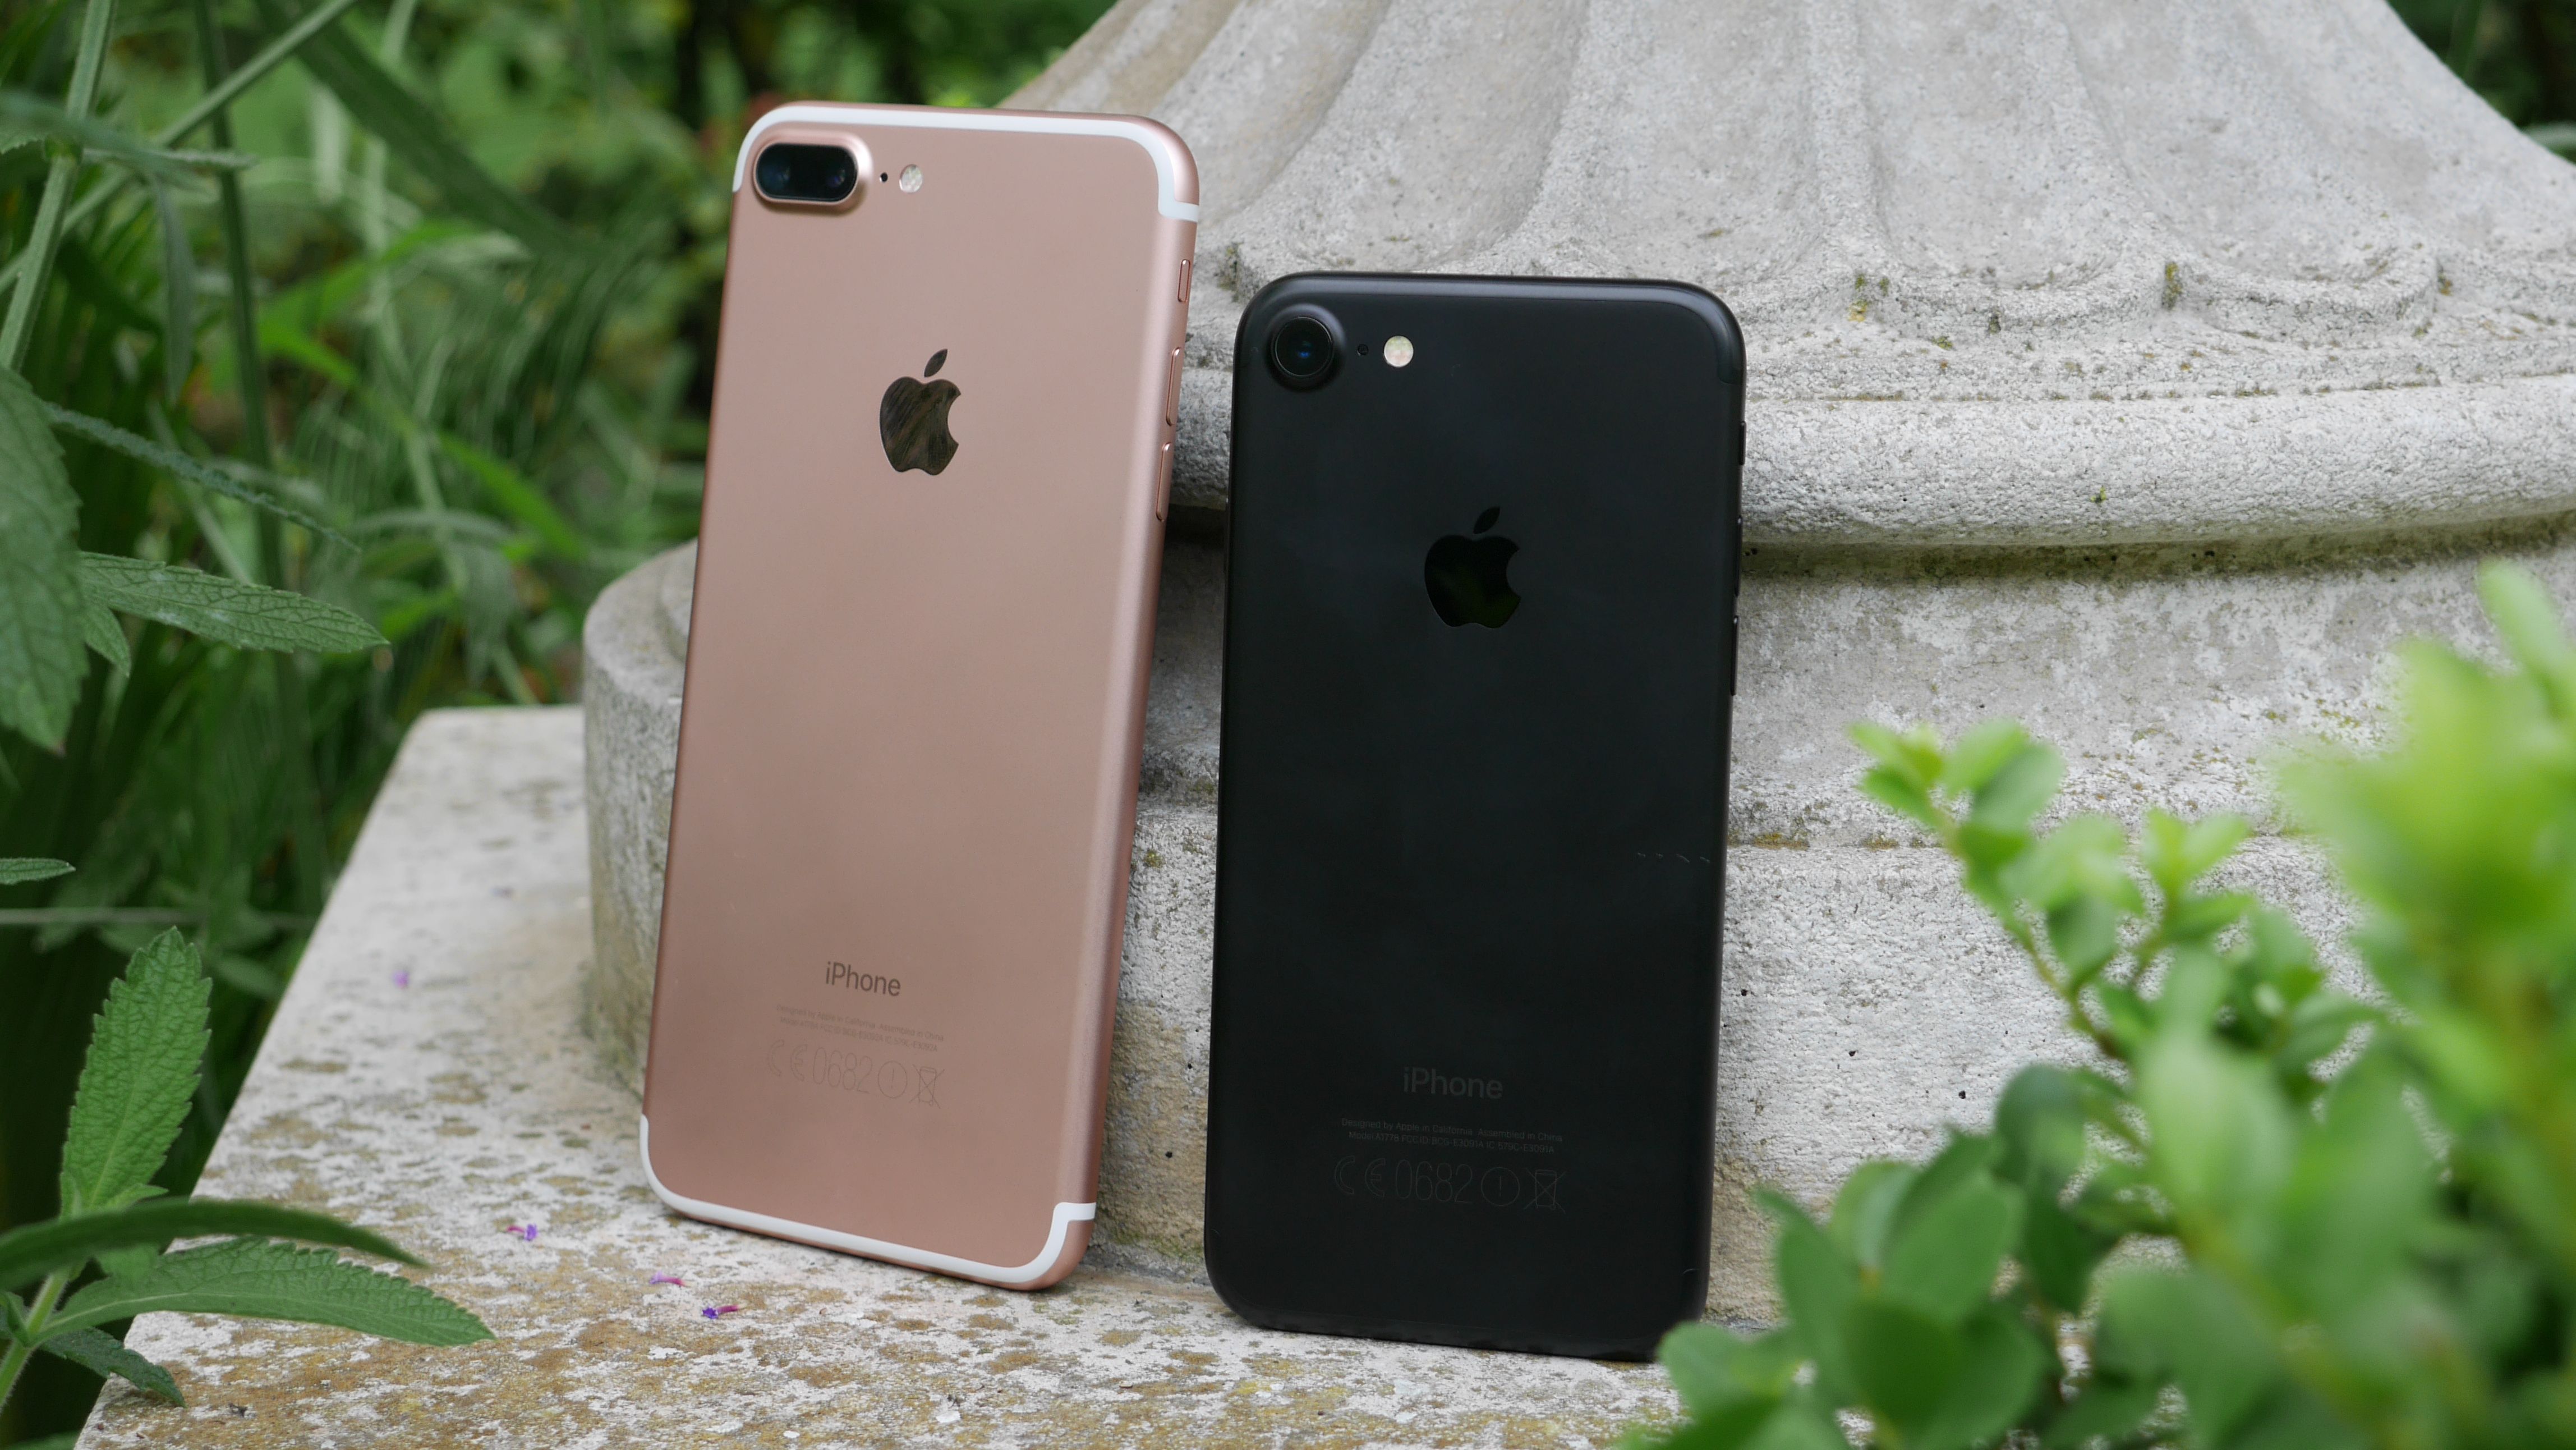 Karu keten Middellandse Zee iPhone 7 vs iPhone 7 Plus: What's the difference and which is best for me?